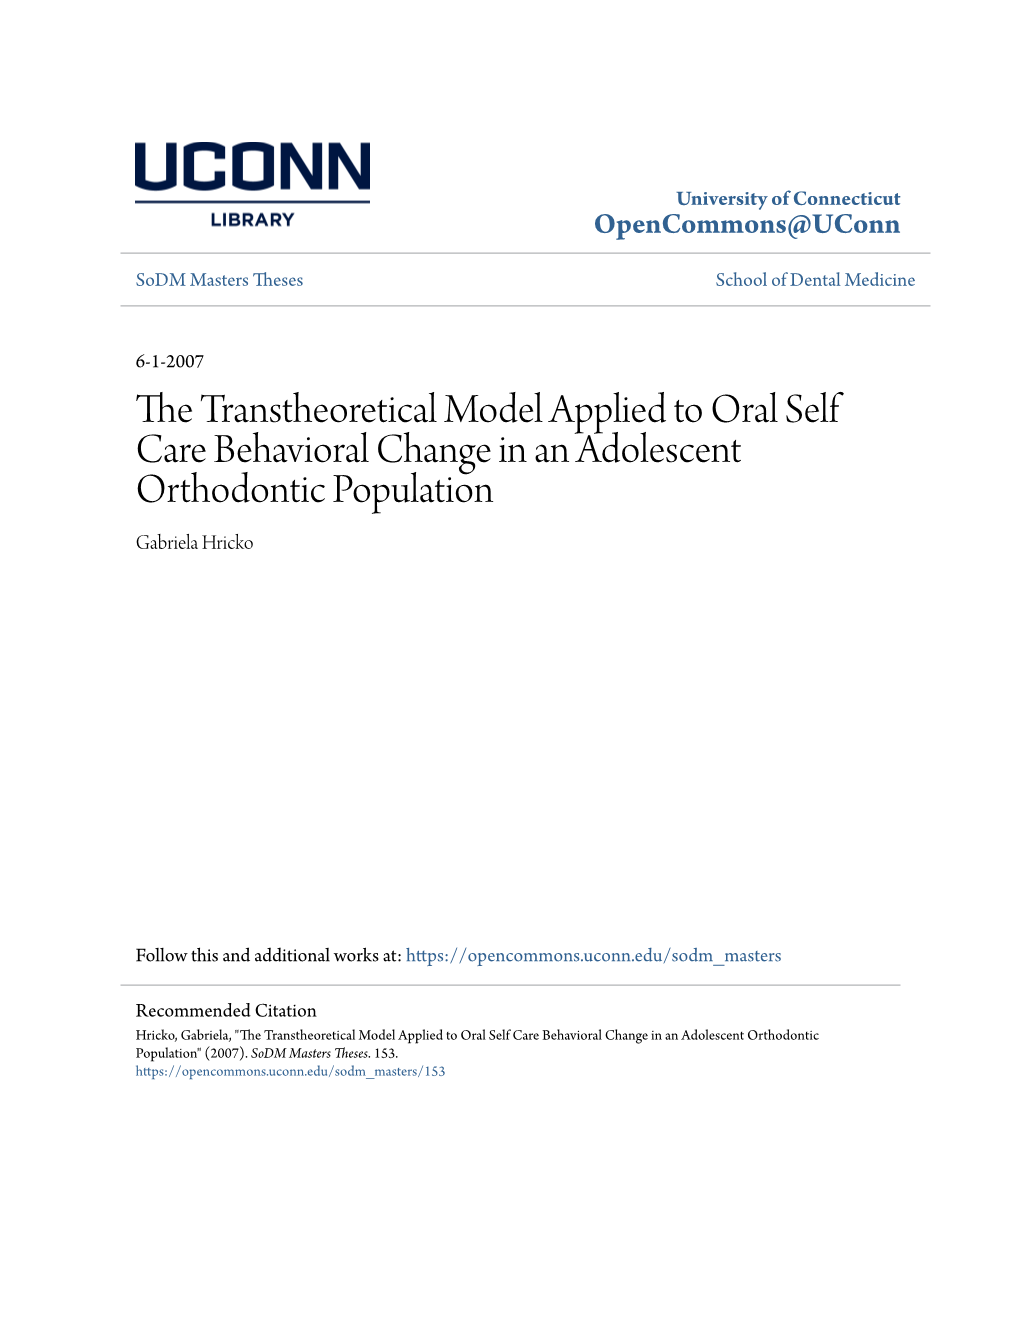 The Transtheoretical Model Applied to Oral Self Care Behavioral Change